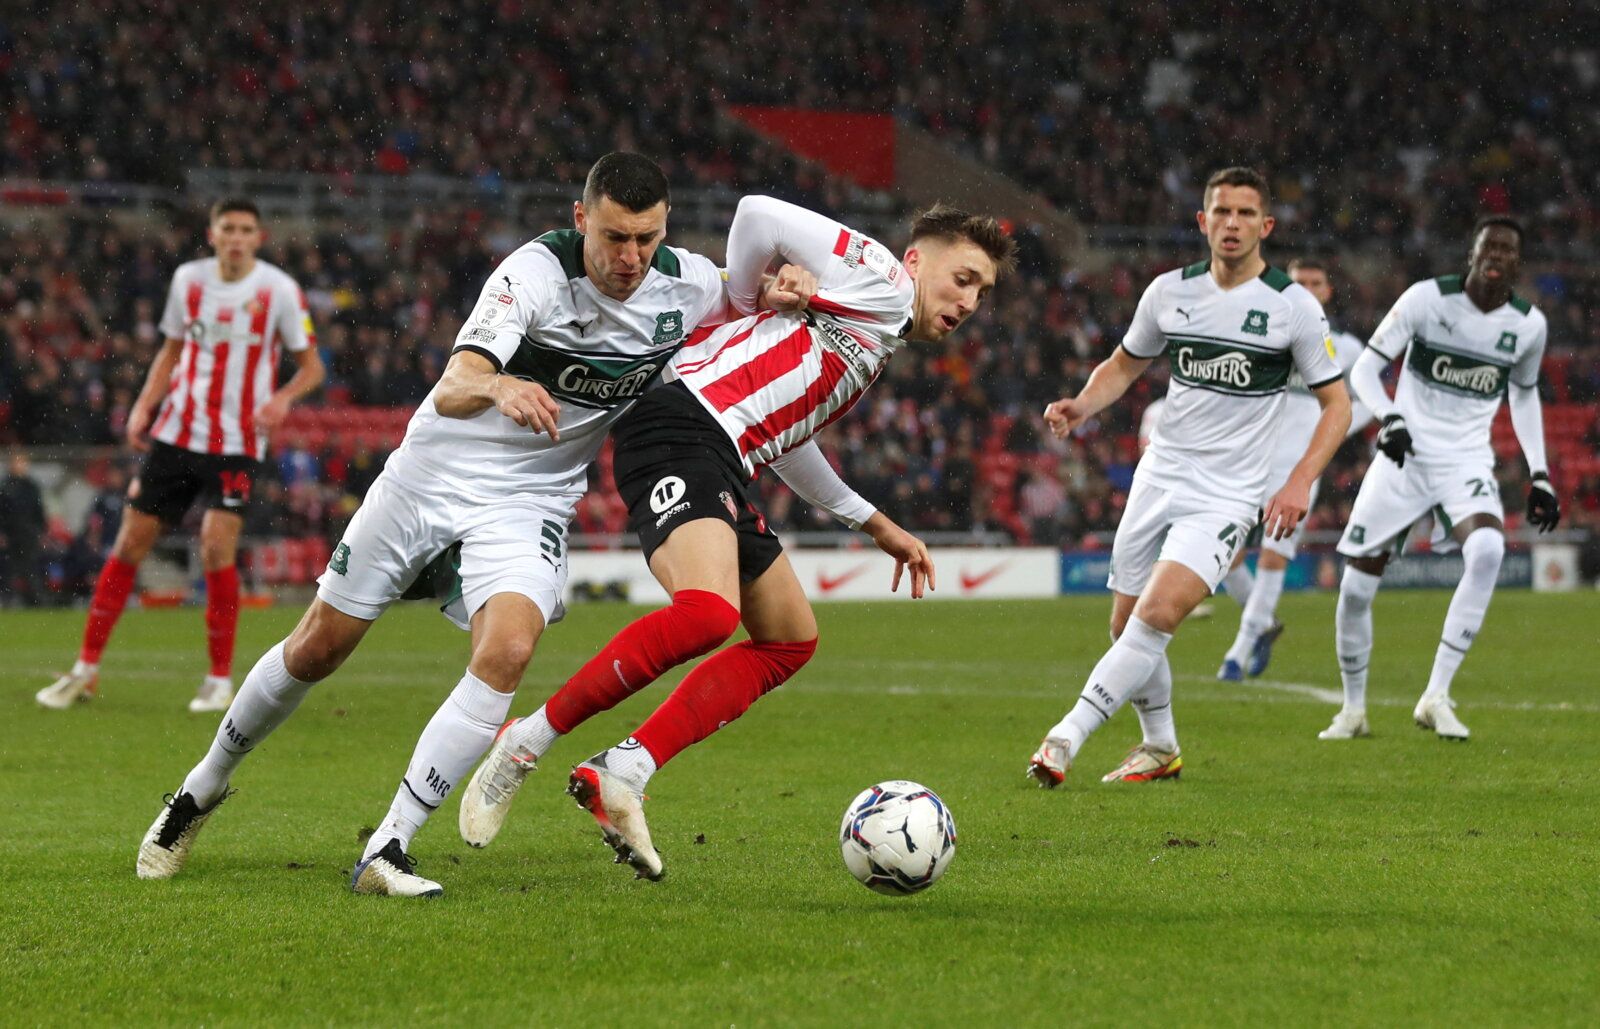 Soccer Football - League One- Sunderland v Plymouth Argyle - Stadium of Light, Sunderland, Britain - December 11, 2021  Sunderland's Dan Neil in action with Plymouth's James Wilson   Action Images/Lee Smith  EDITORIAL USE ONLY. No use with unauthorized audio, video, data, fixture lists, club/league logos or 